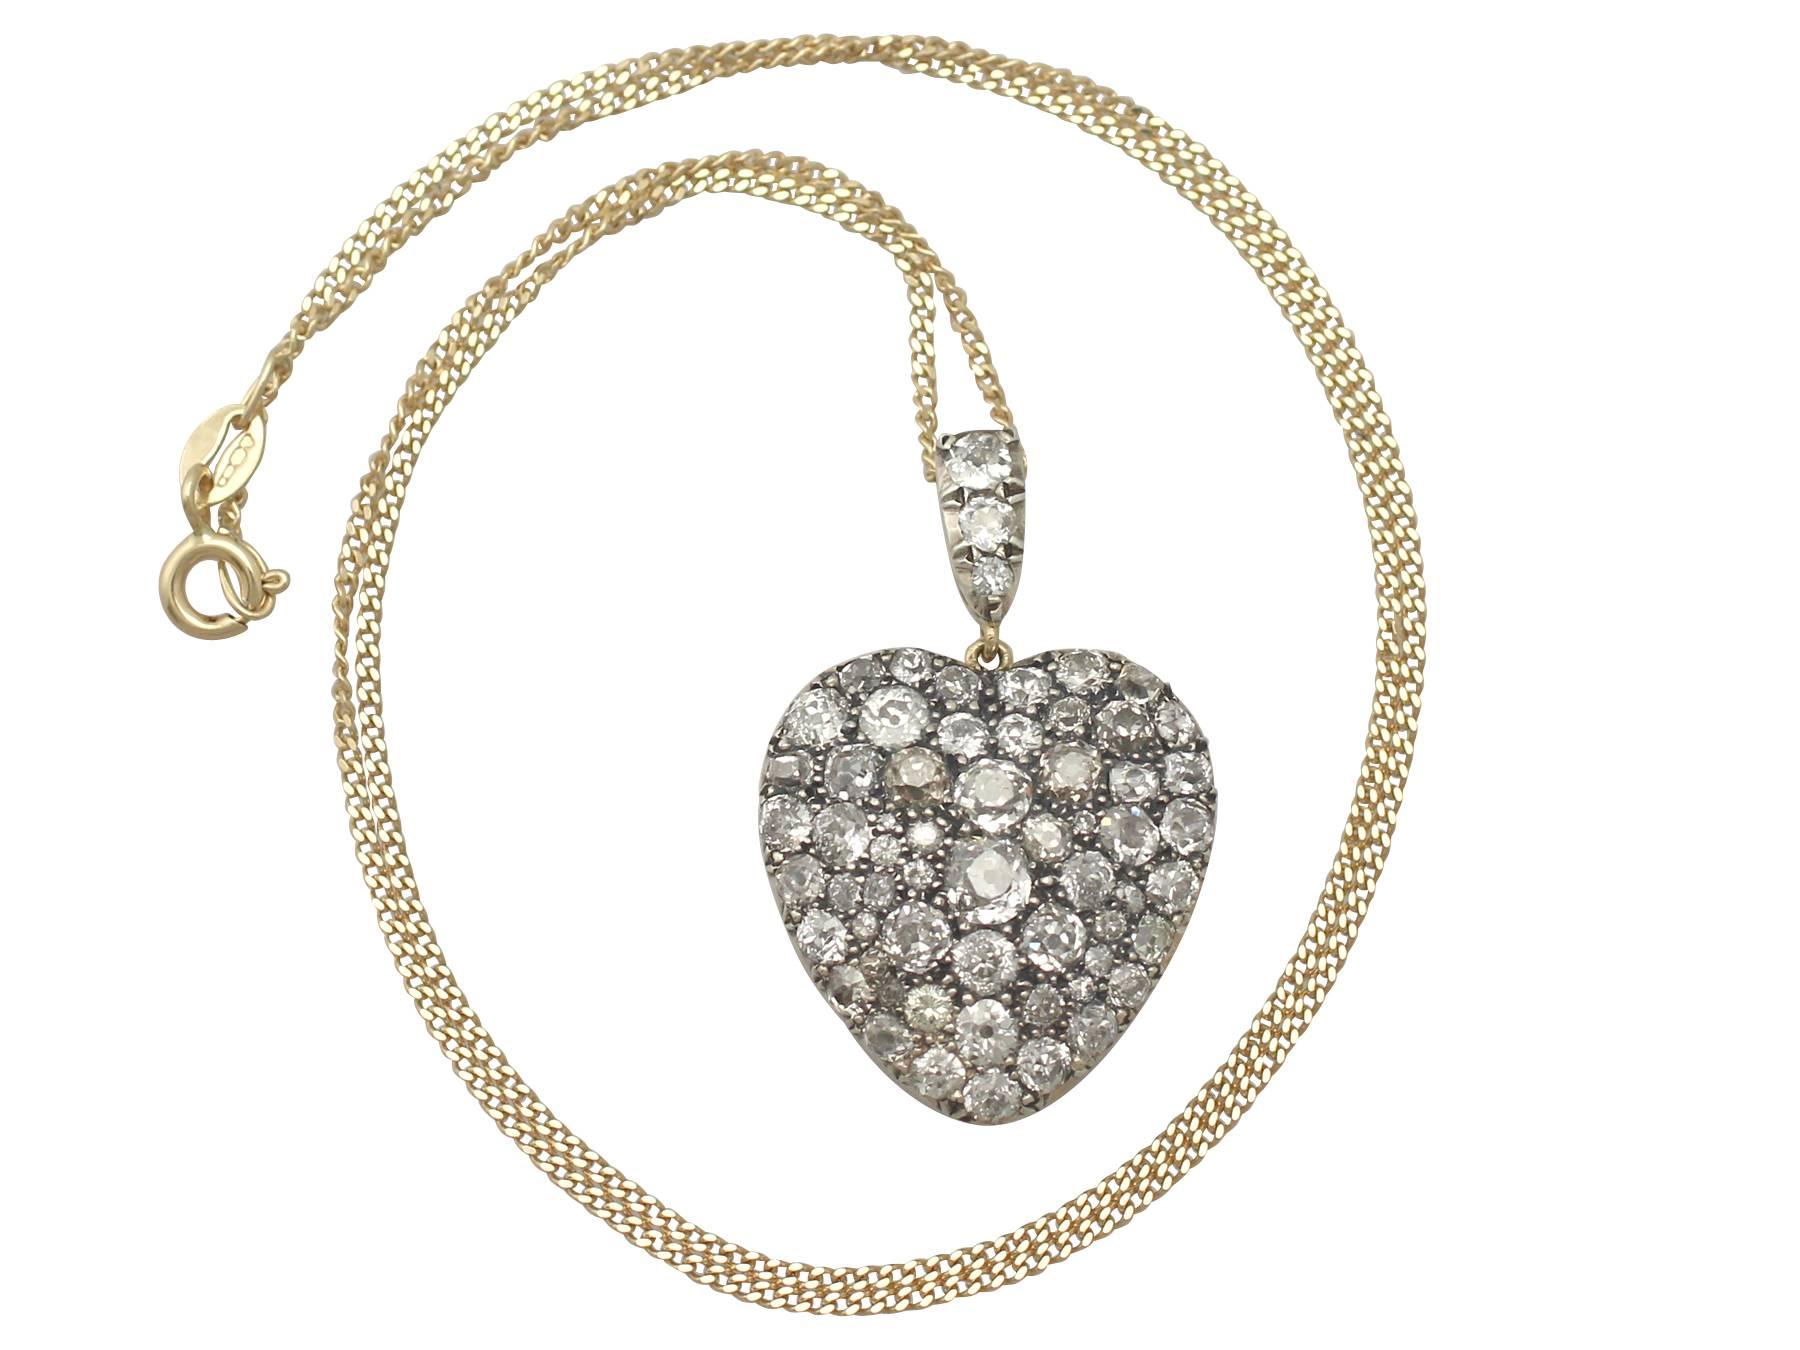 A stunning, fine and impressive antique Victorian 7.95 carat diamond and 15 karat yellow gold, silver set heart shaped pendant; part of our diverse antique jewellery collections

This stunning, fine an impressive antique diamond heart pendant has